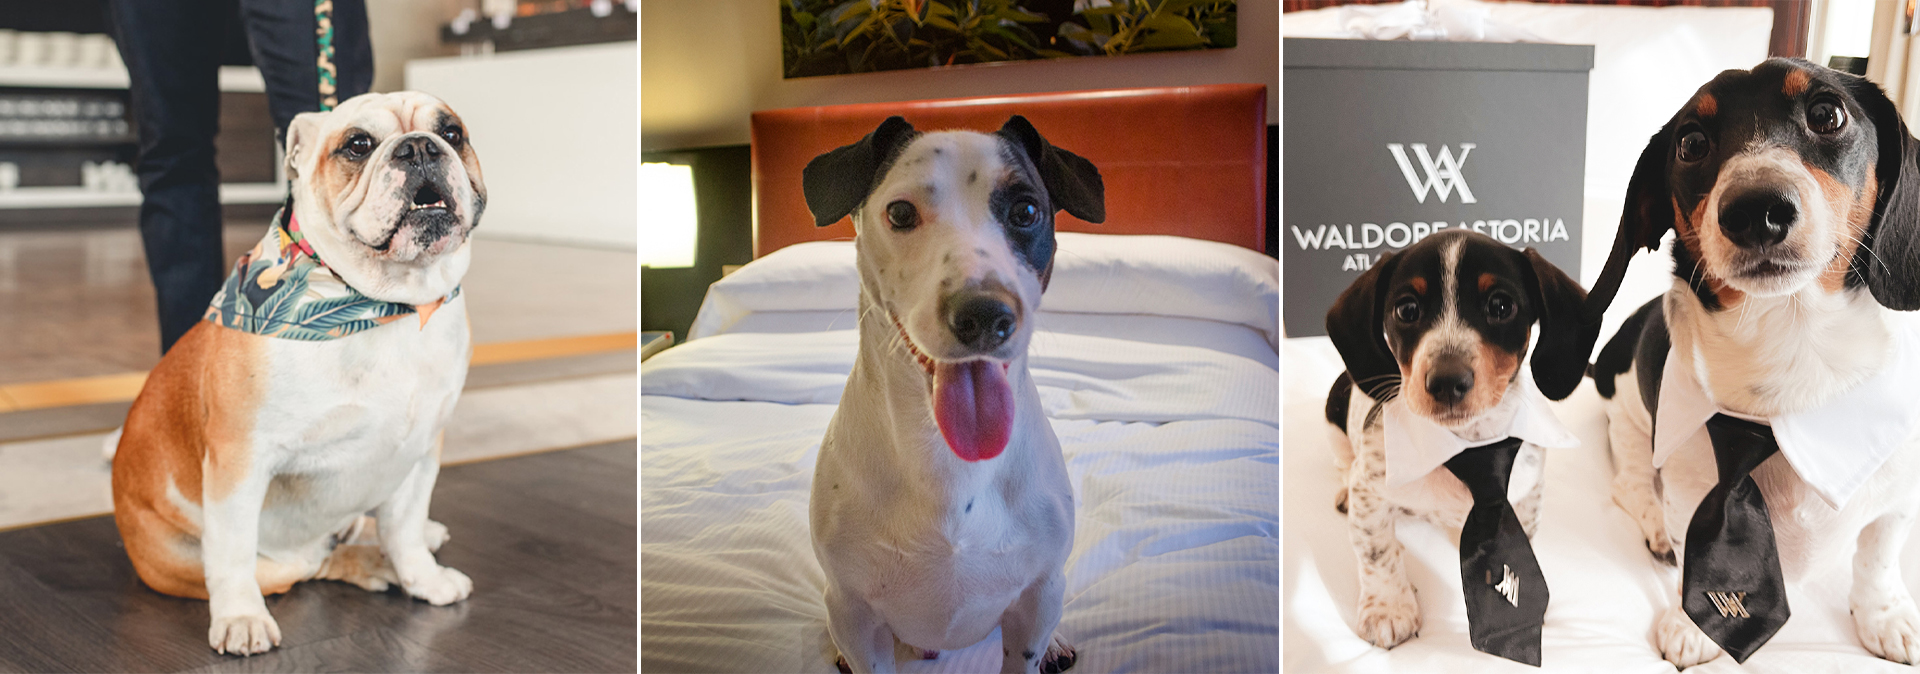 Dog-friendly hotels pamper pets as well as their owners